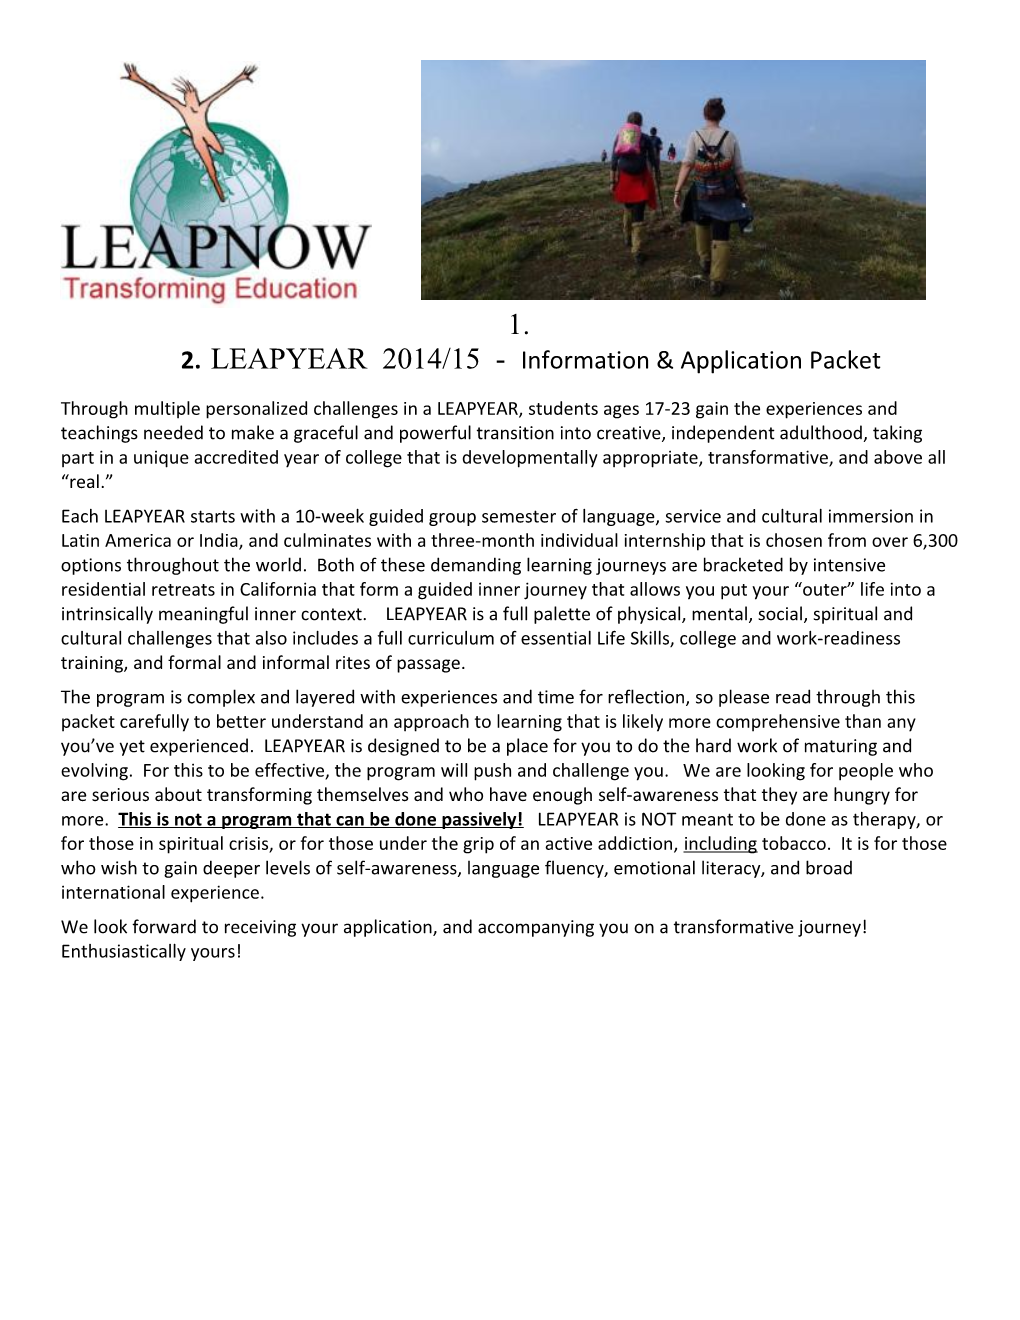 LEAPYEAR 2014/15 - Information & Application Packet